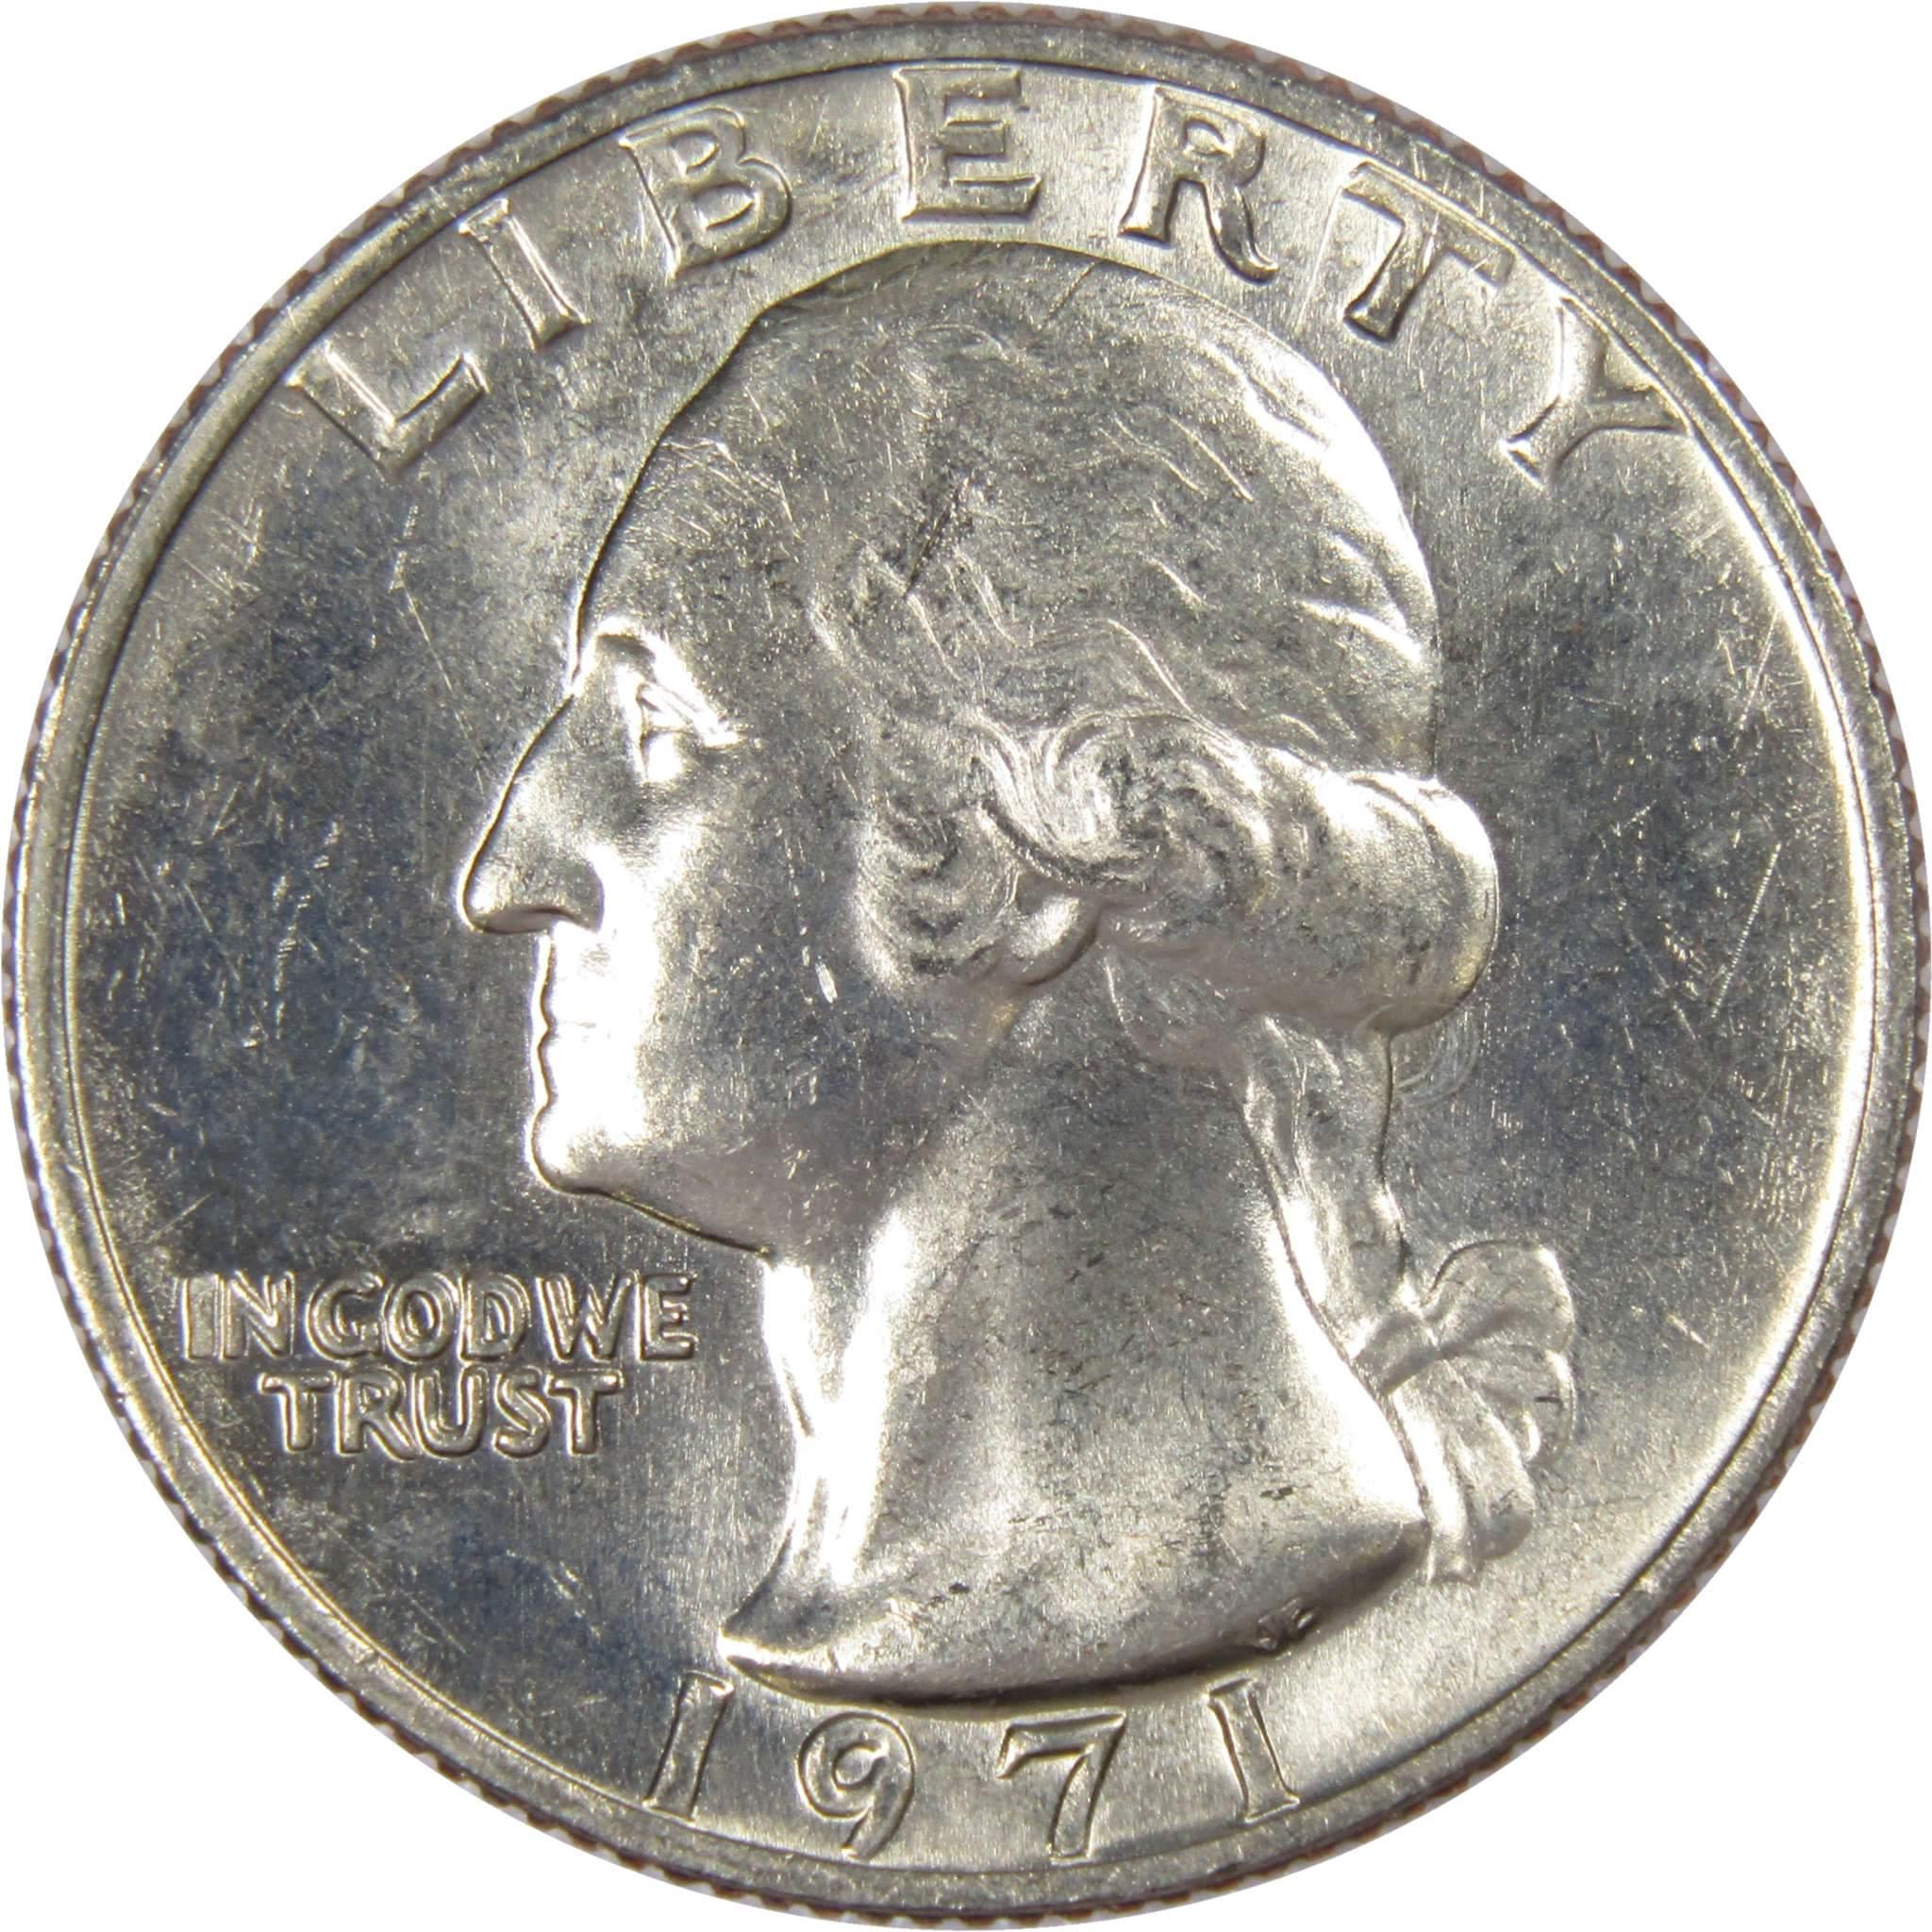 1971 Washington Quarter BU Uncirculated Mint State 25c US Coin Collectible